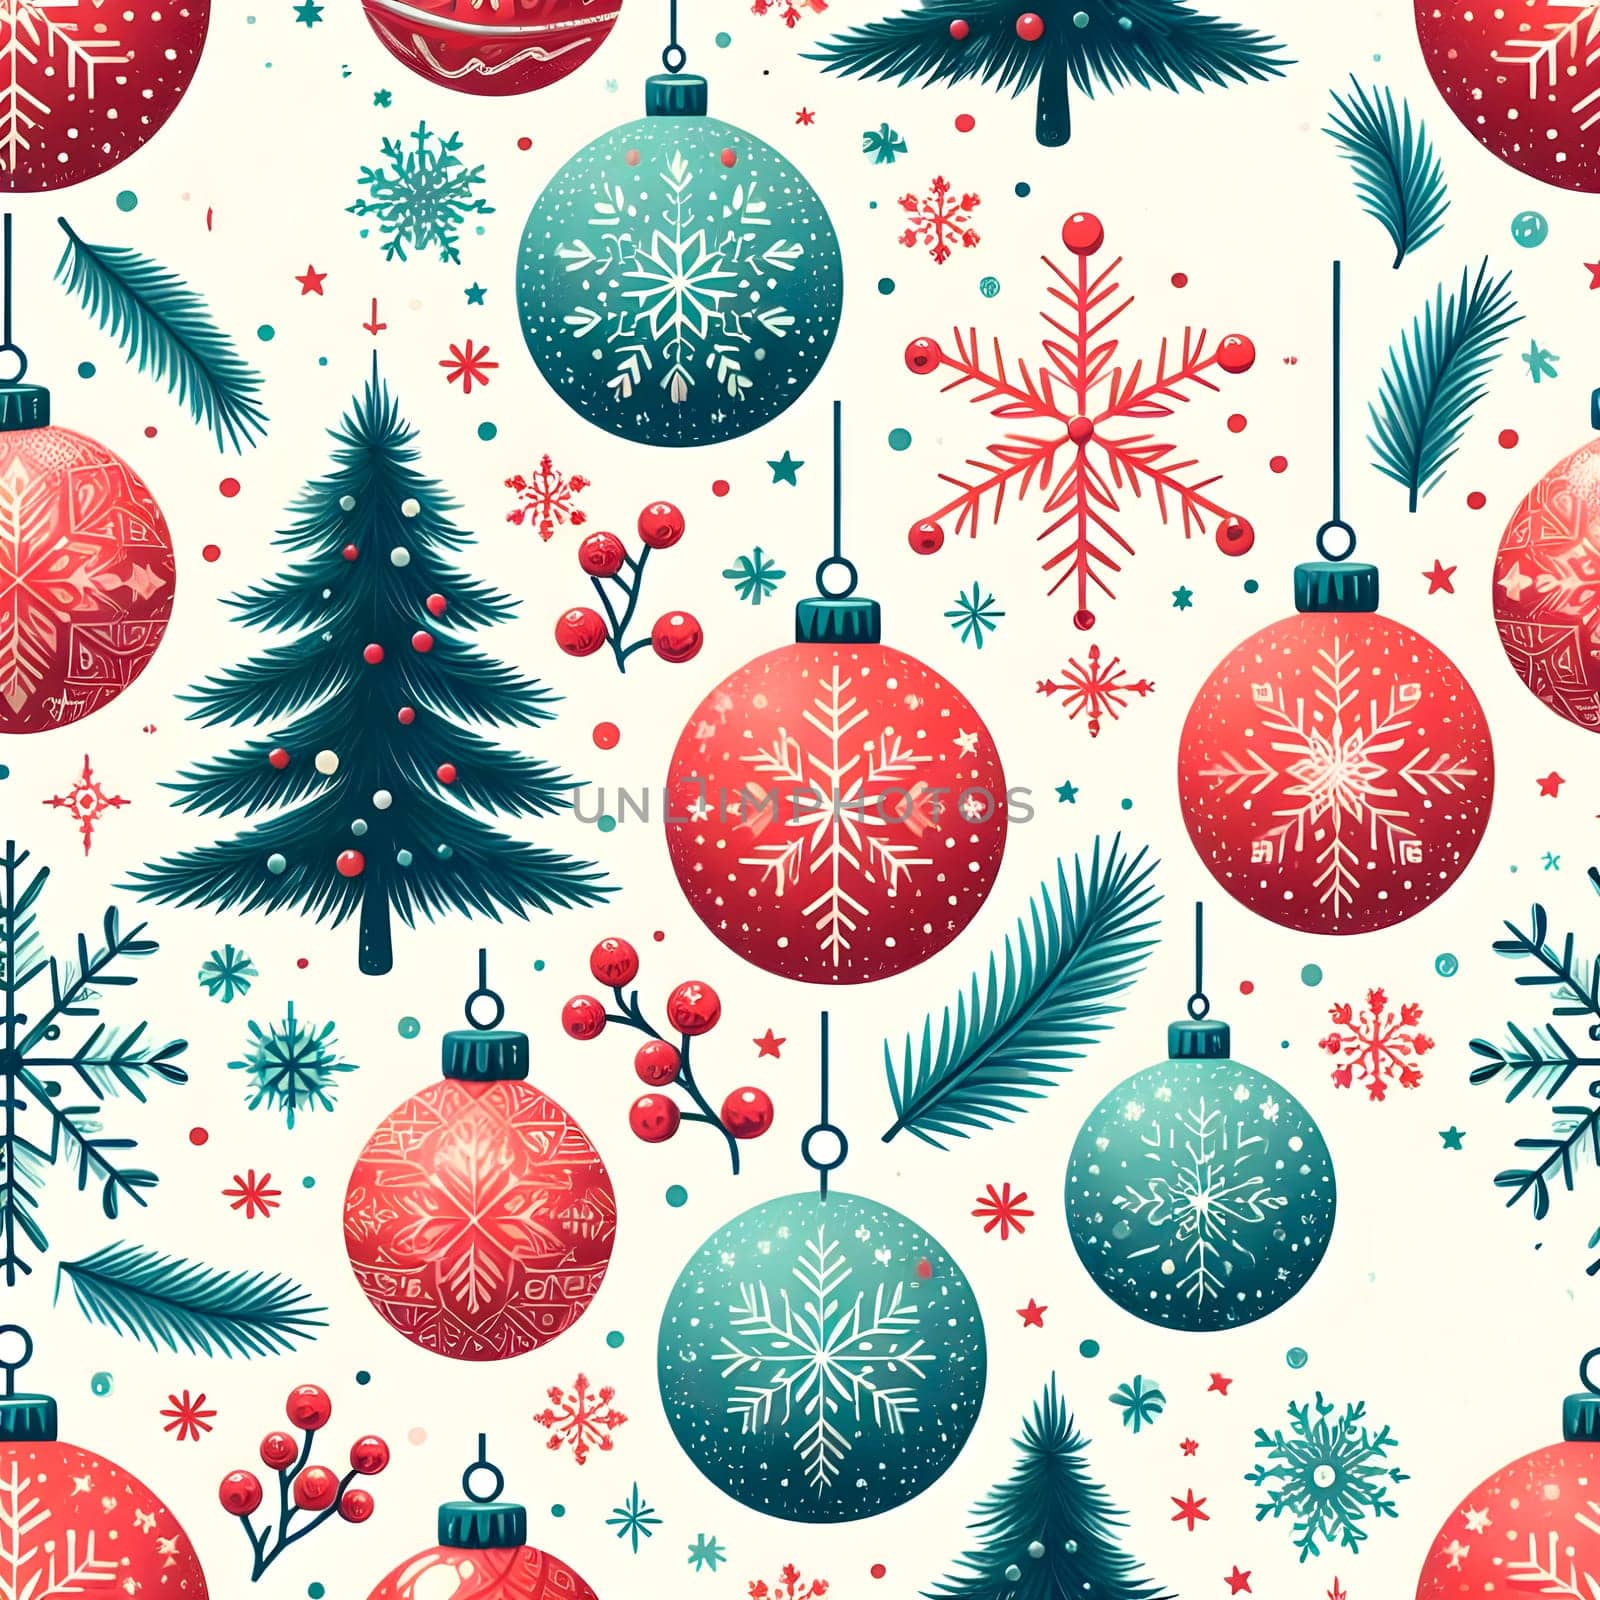 New year pattern.Christmas decoration with balls,fir tree and snowfalls on white background by andre_dechapelle